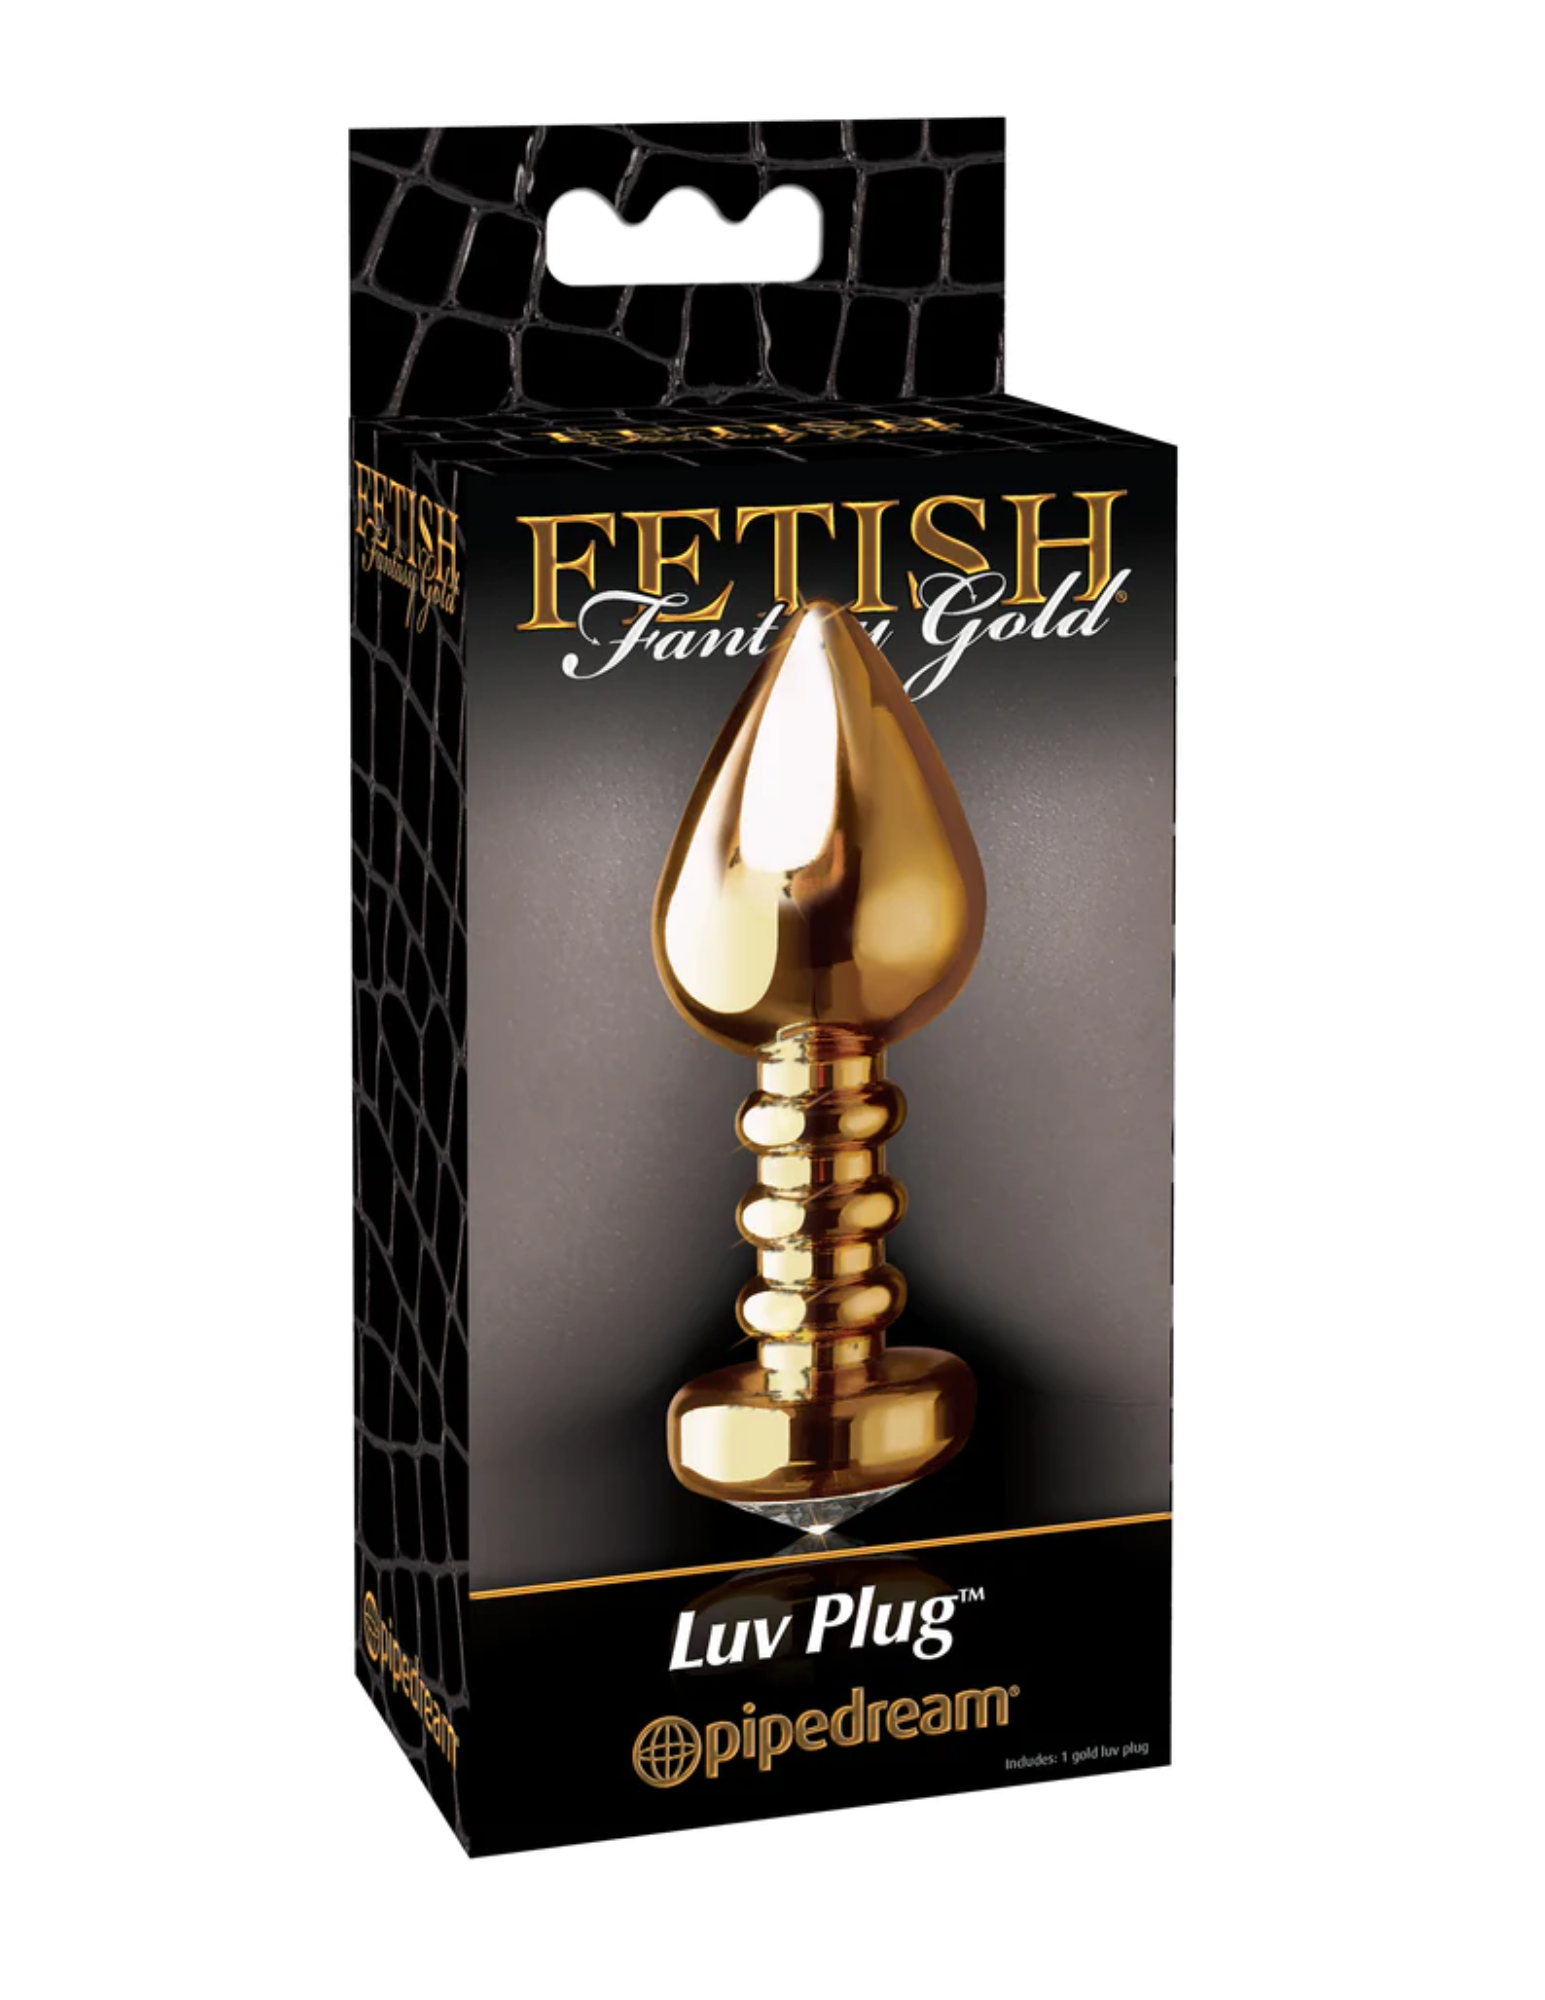 Photo of the front of the box for the etish Fantasy Gold Luv Plug from Pipedreams (gold).